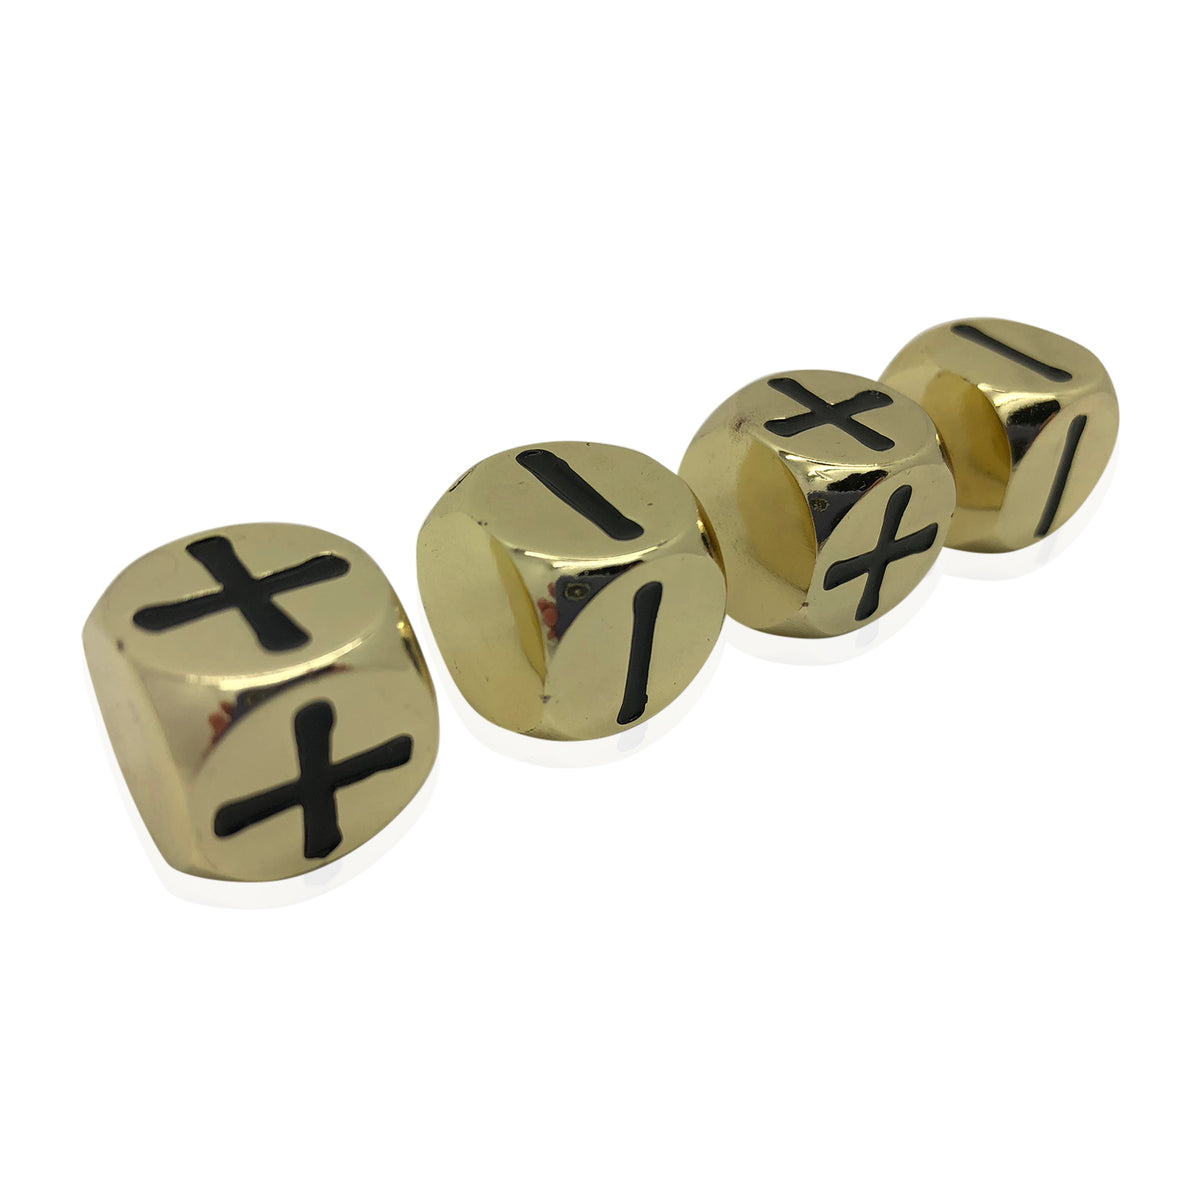 Fate Dice – Dead Man&#39;s Gold Pack of 4 Metal Dice